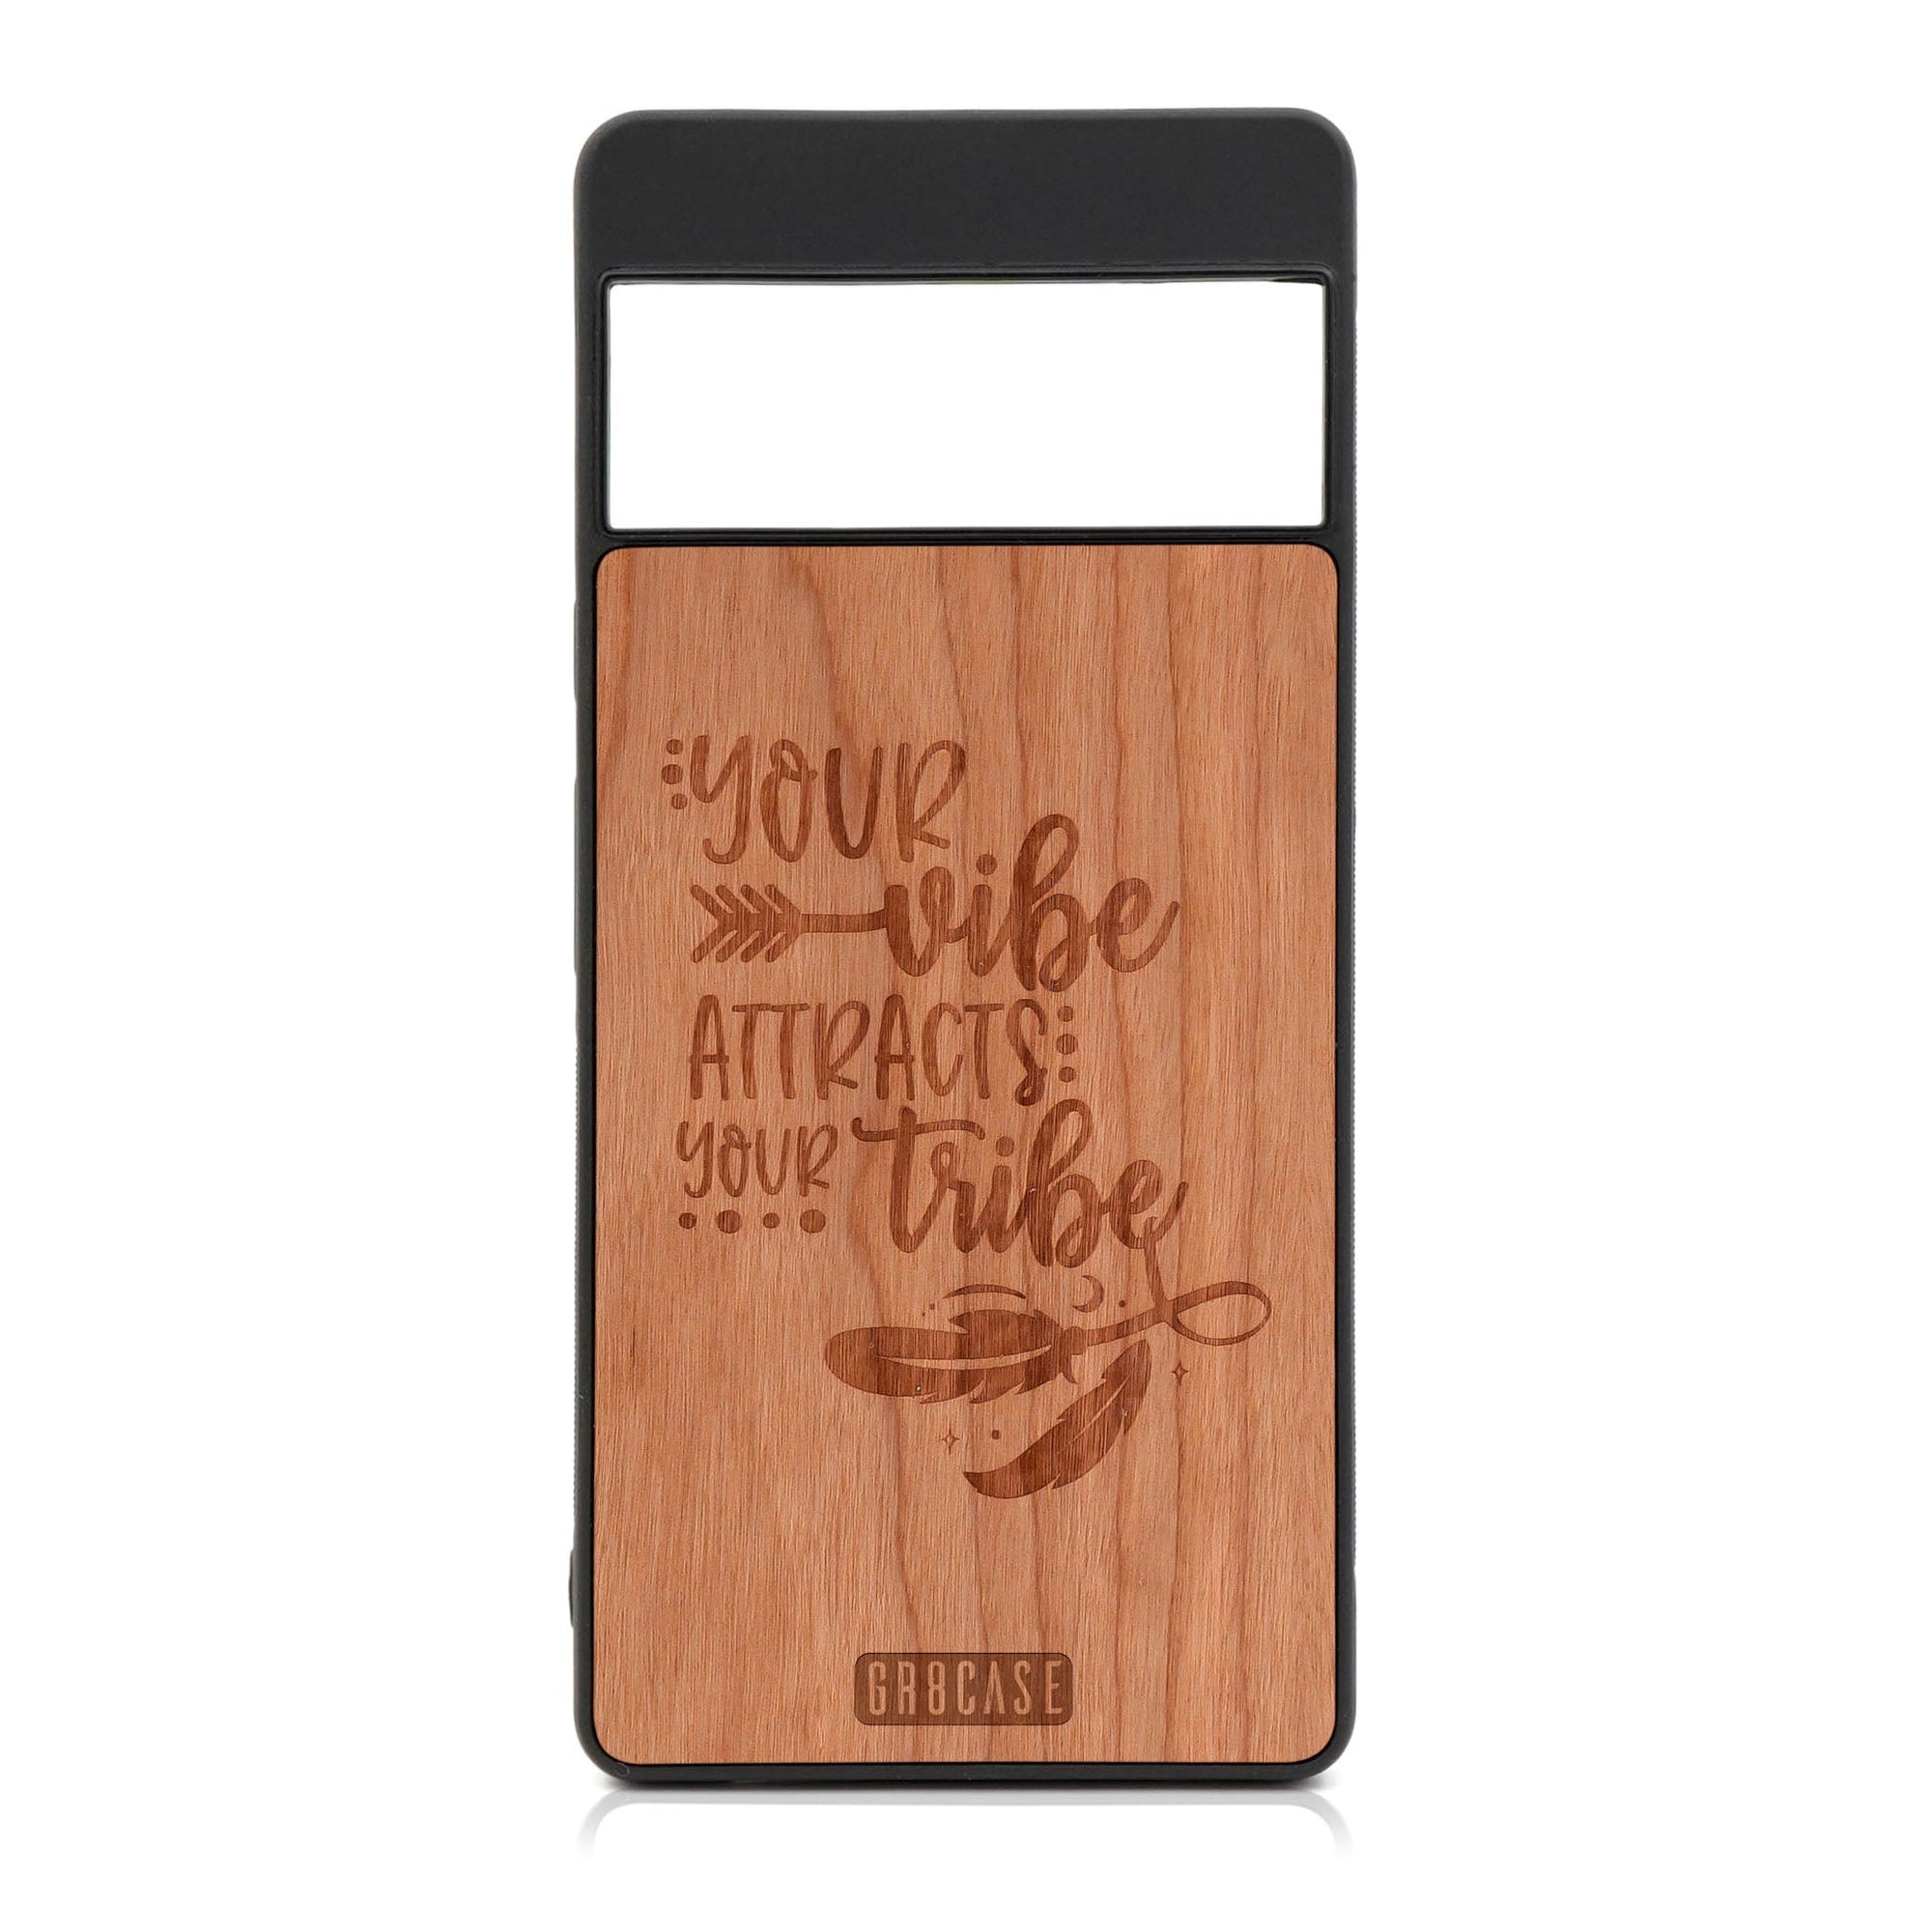 Your Vibe Attracts Your Tribe Design Wood Case For Google Pixel 7